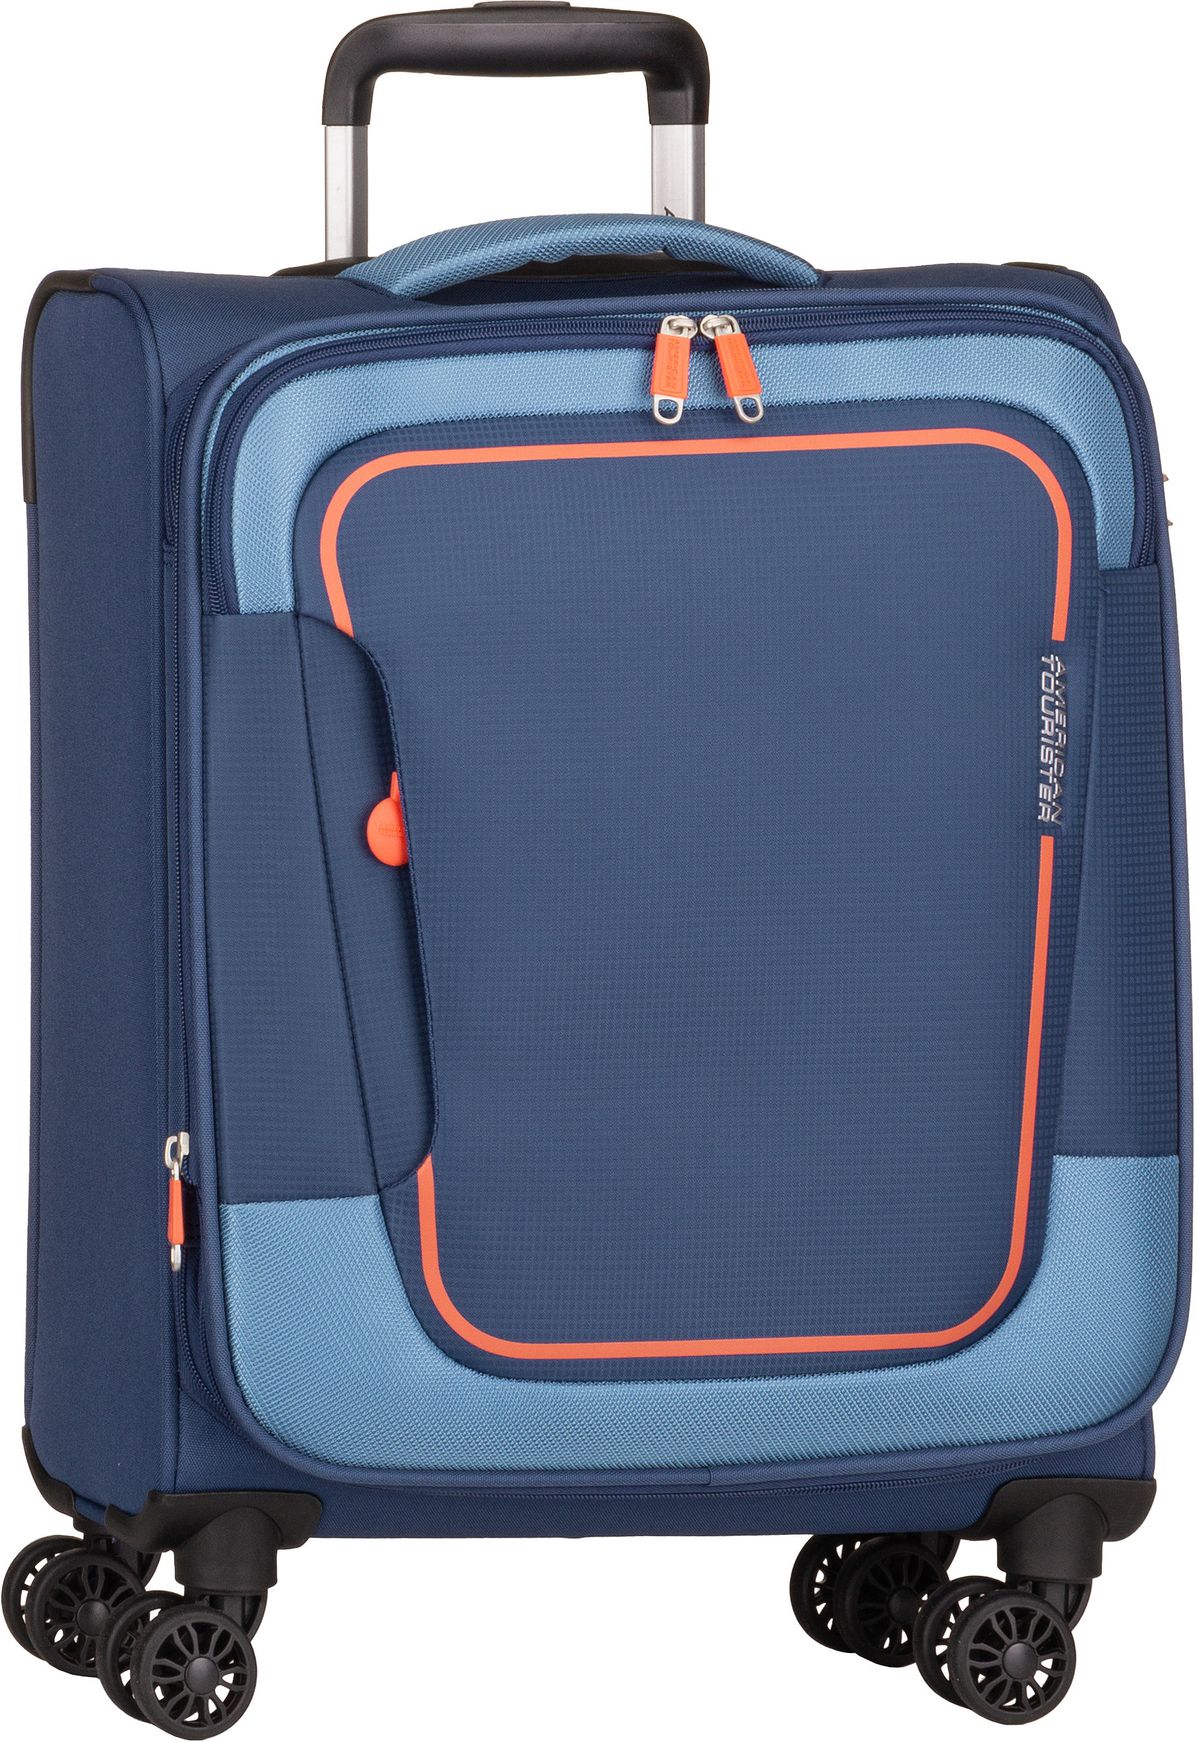 American Tourister Pulsonic Spinner 55 EXP  in Blau (40.5 Liter), Koffer & Trolley von American Tourister